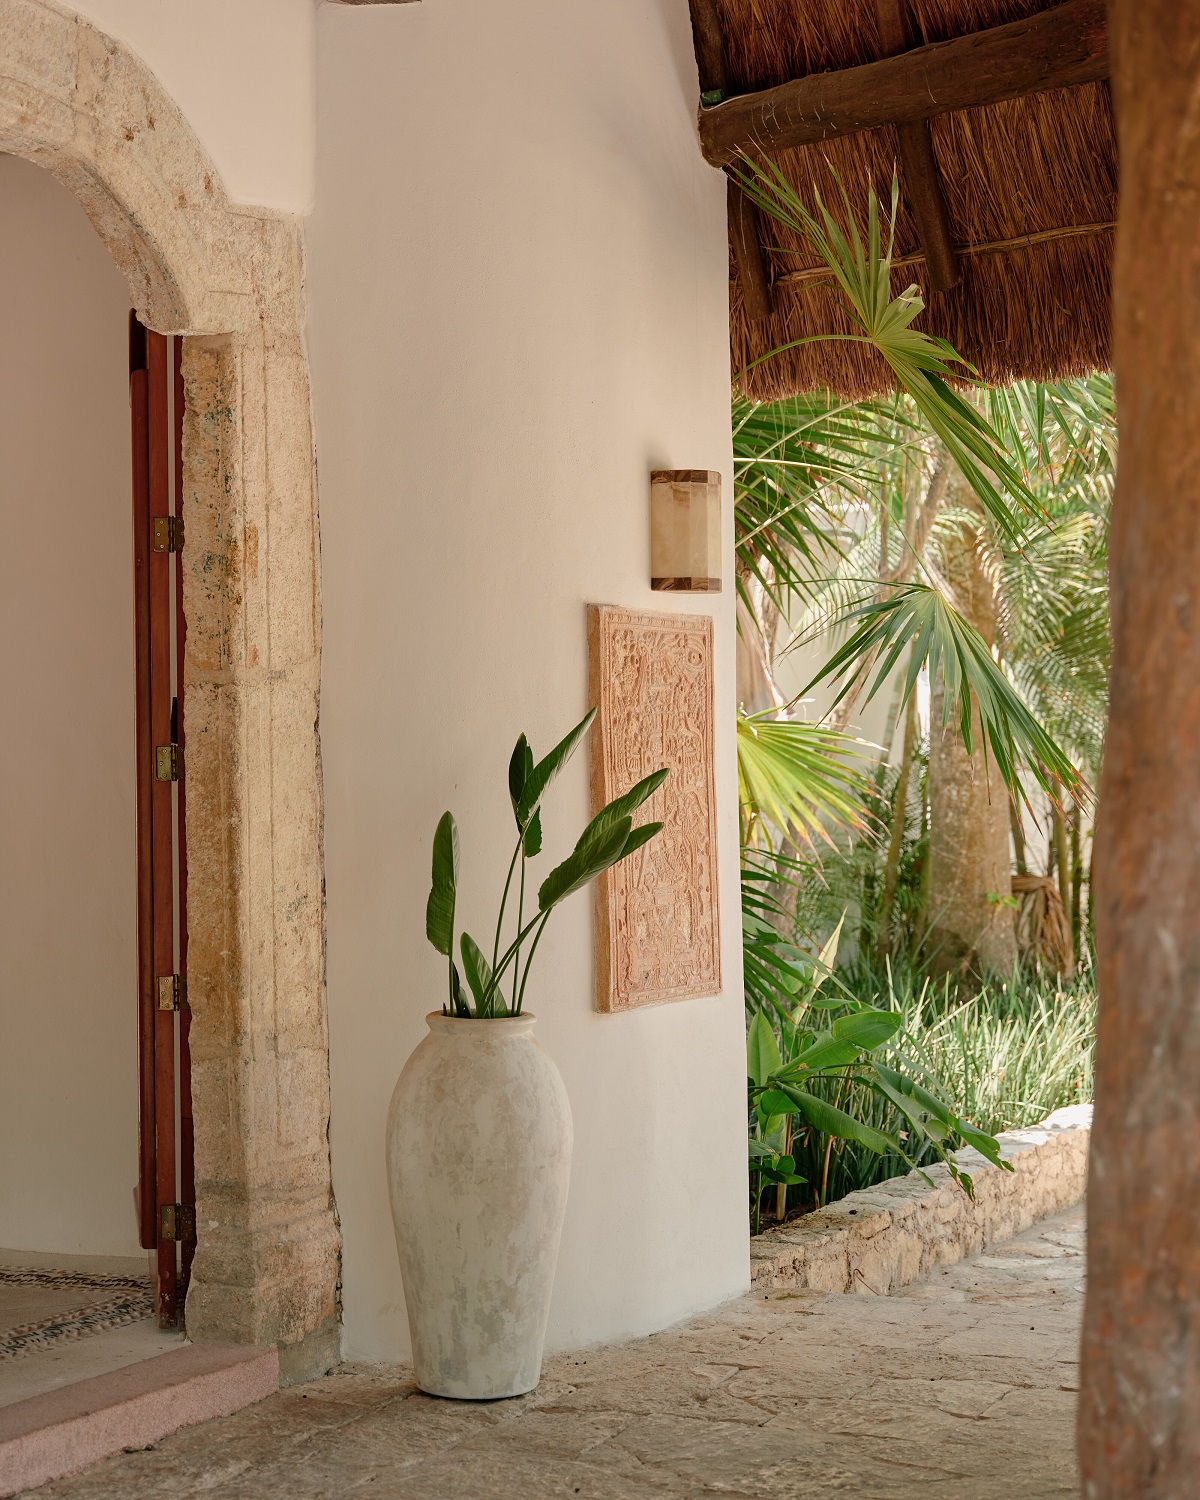 natural surfaces and shapes with wood and clay details in passageway leading to tropical gardens